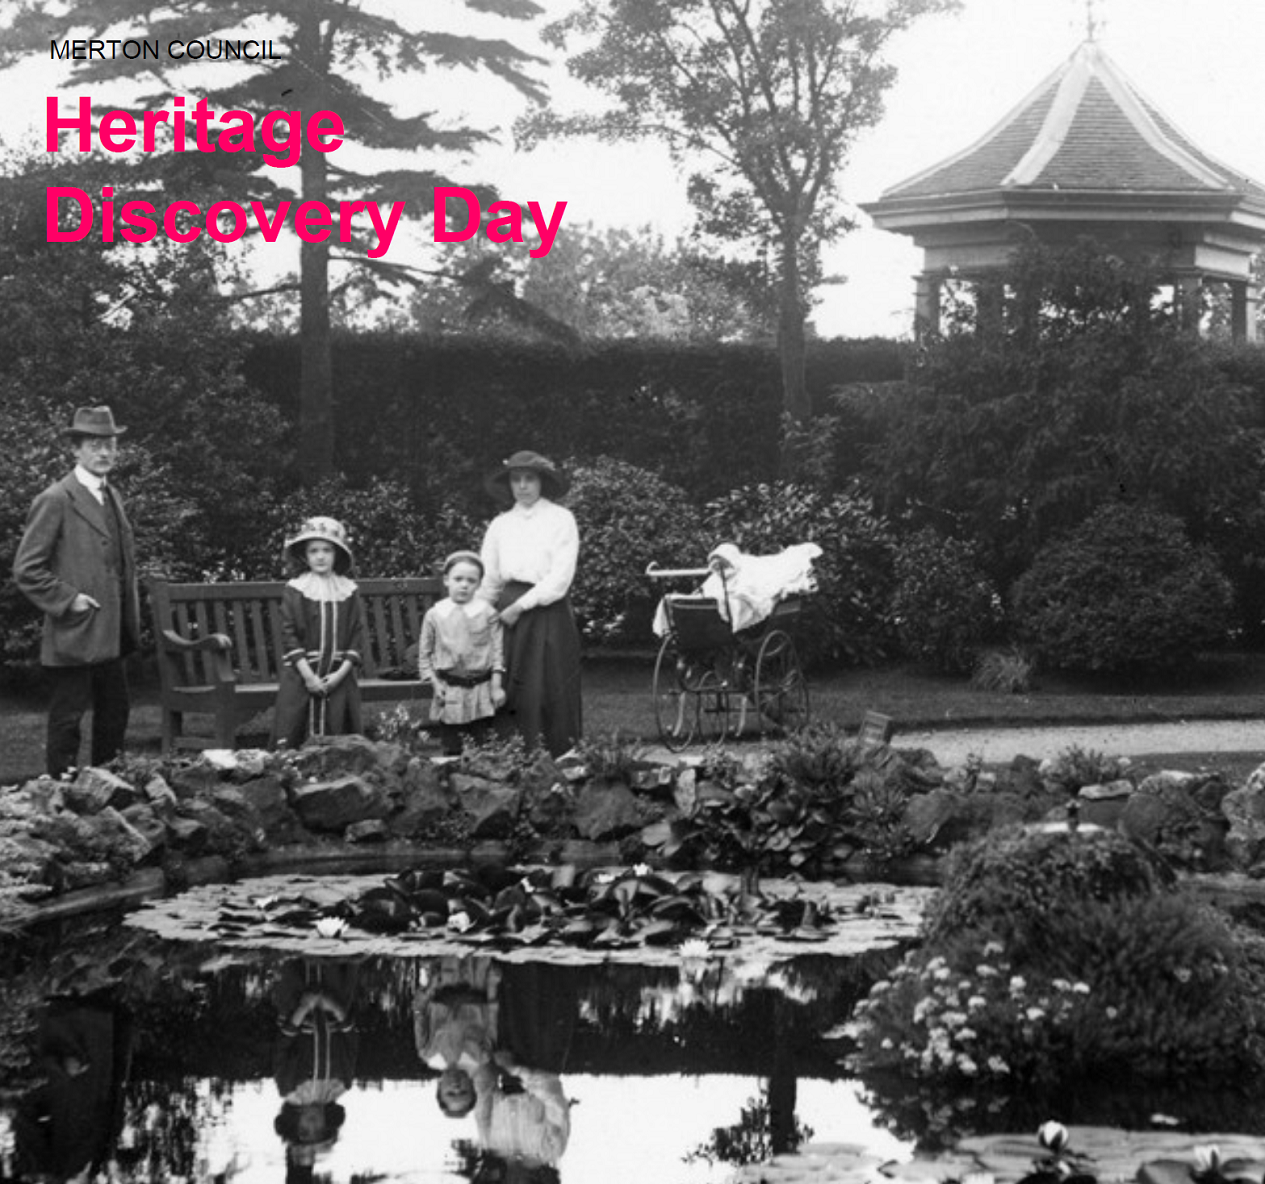 Image of people in the Victoria era standing in John Innes Park and used to promote Merton Heritage Day 2021